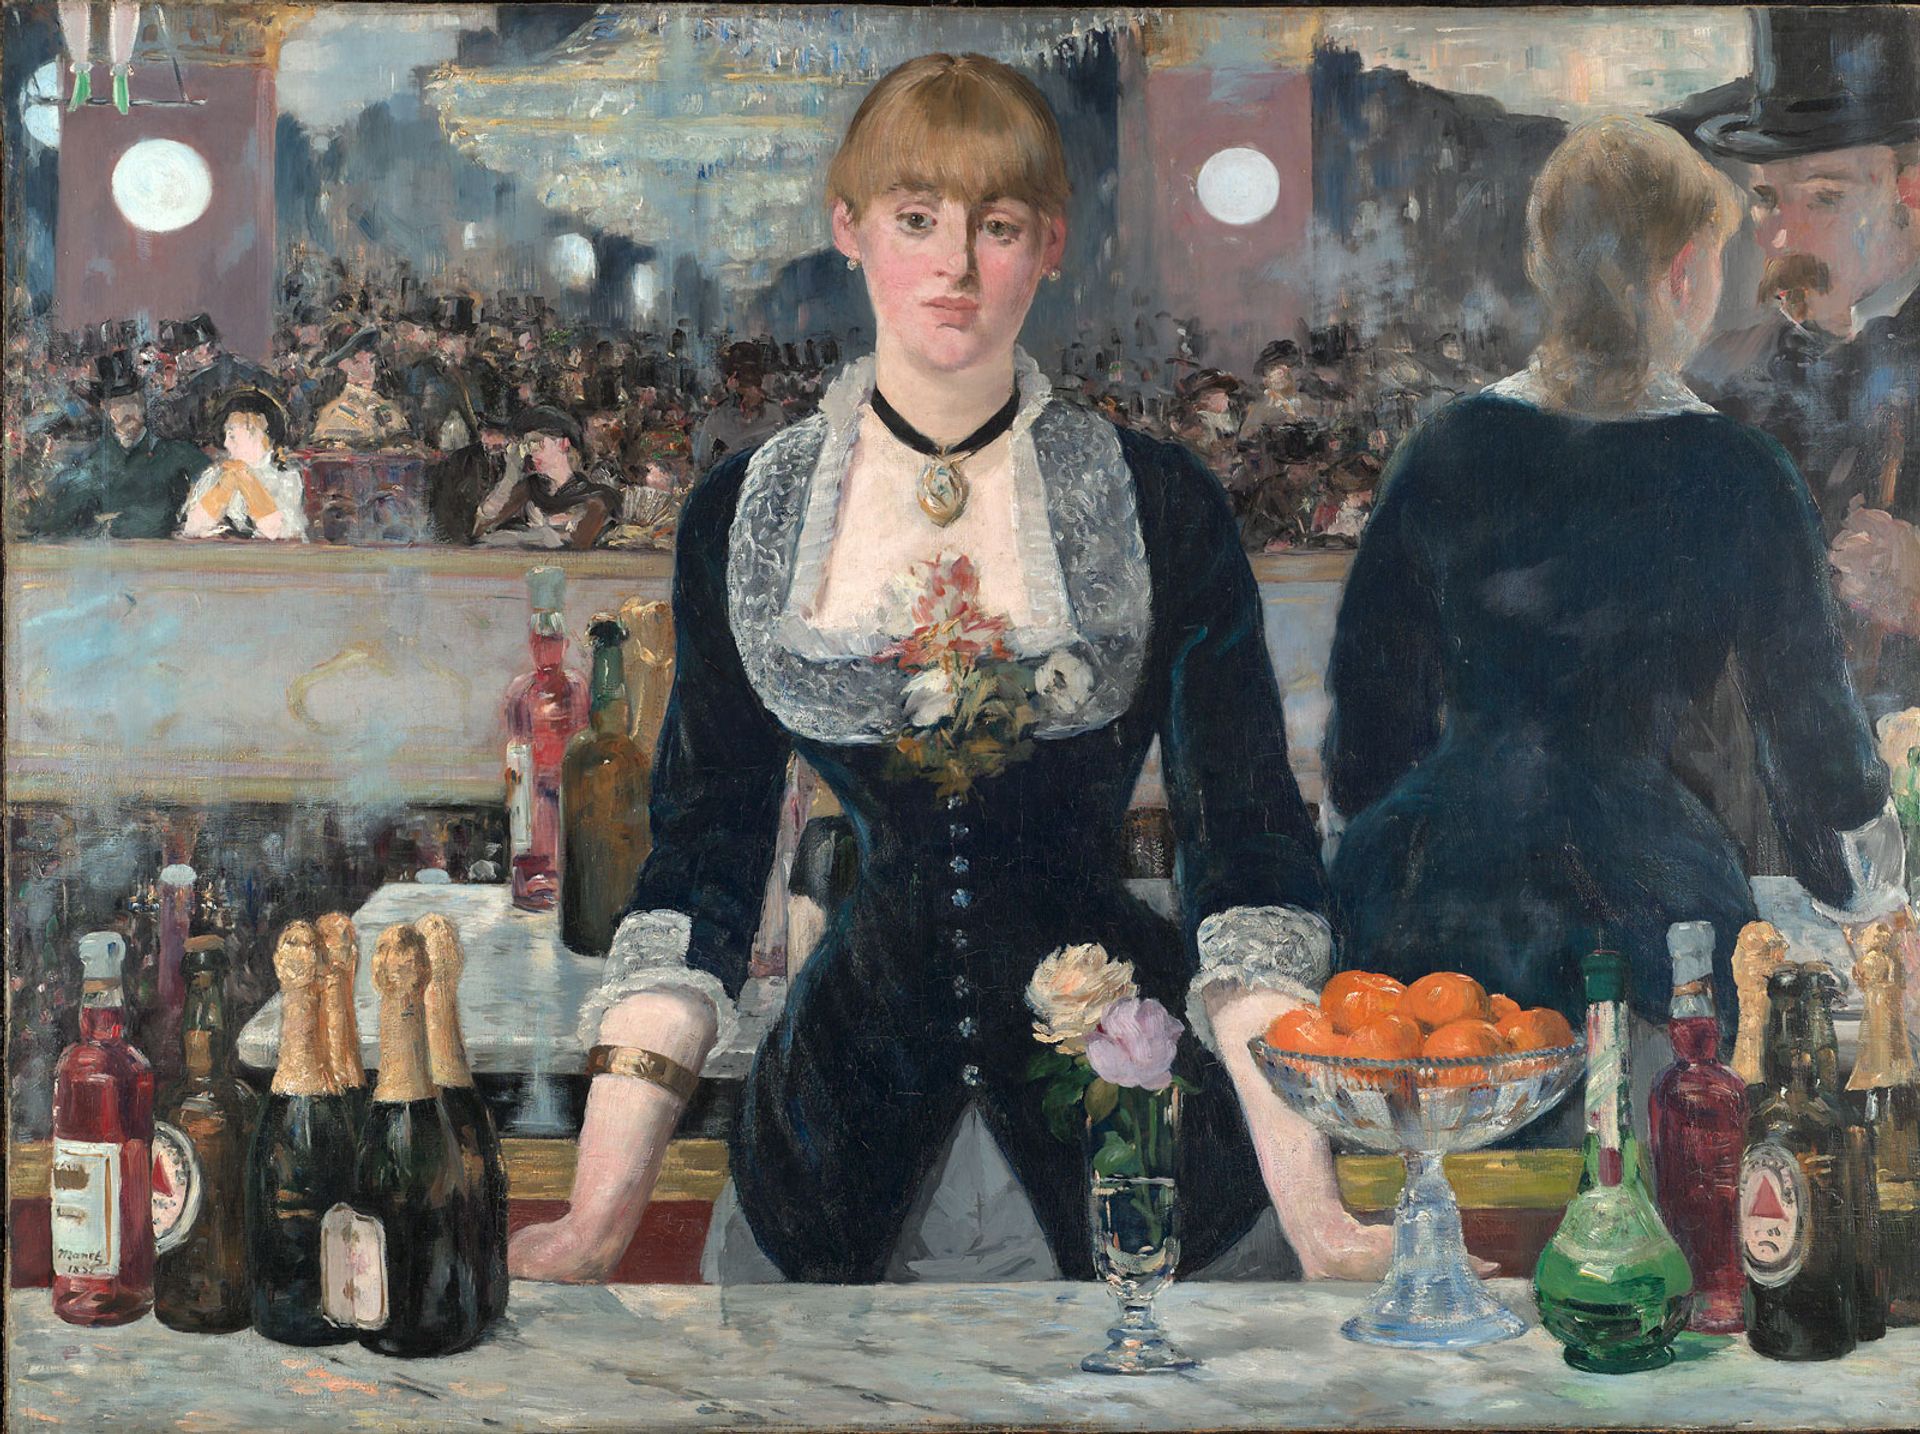 Edouard Manet's A Bar at the Folies-Bergère (1882) will go on show in Japan © The Courtauld Gallery, London